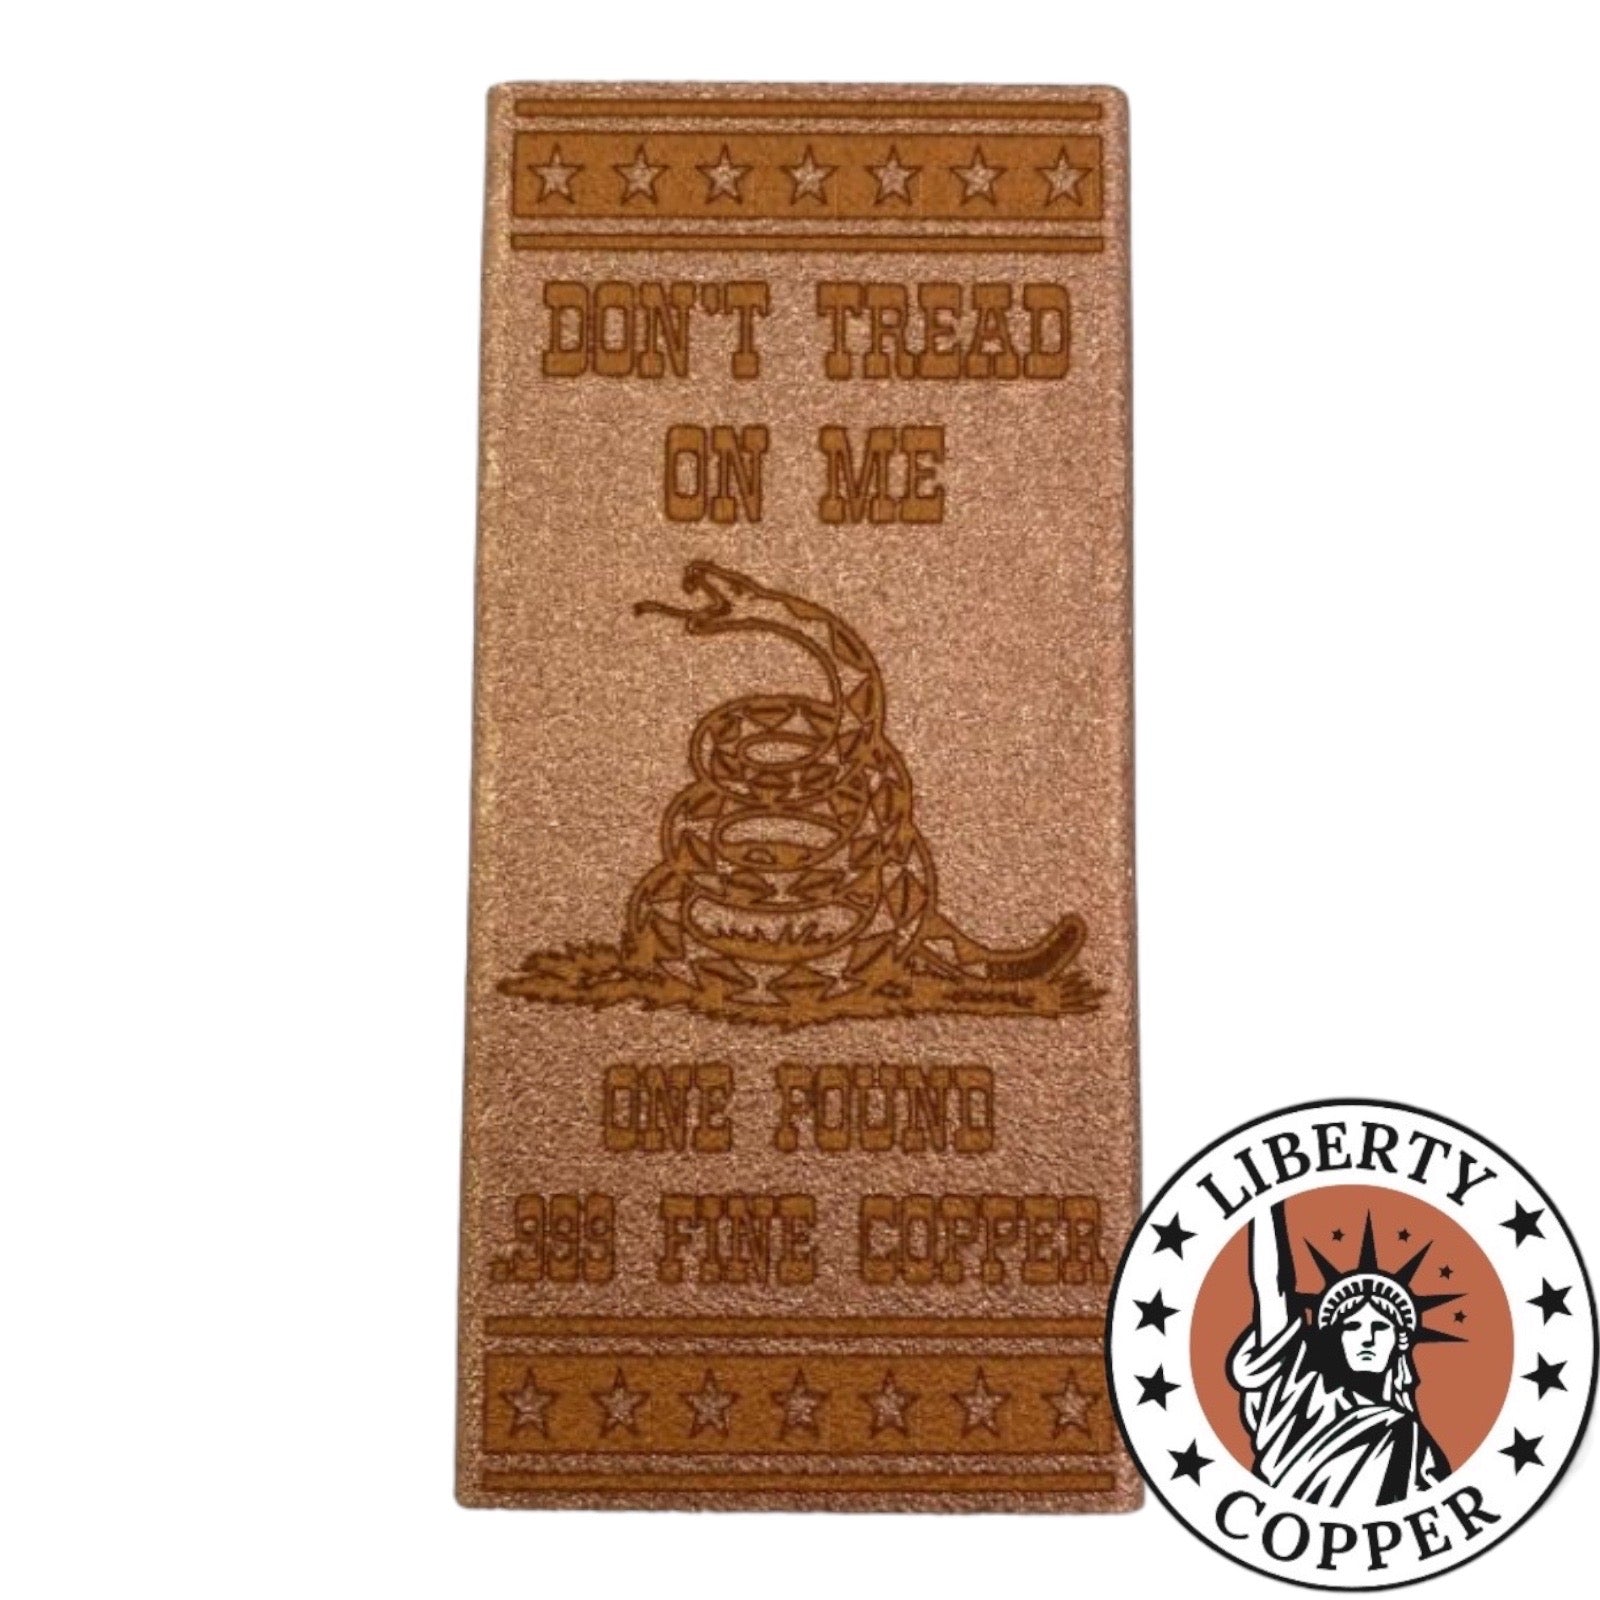 Don't Tread on Me one pound copper bullion bar by Liberty Copper